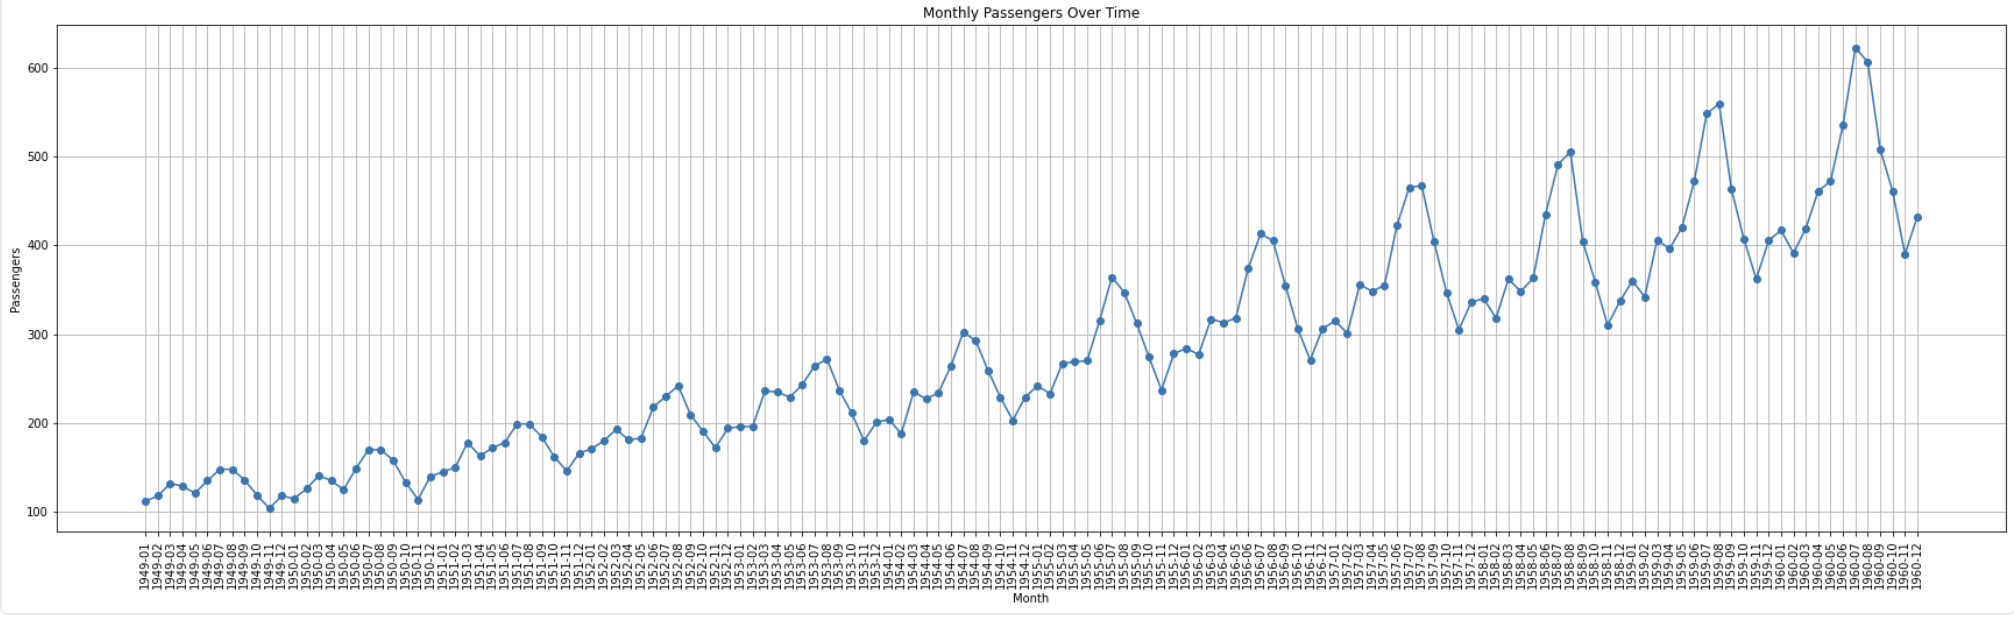 monthly-passengers-over-time-chart